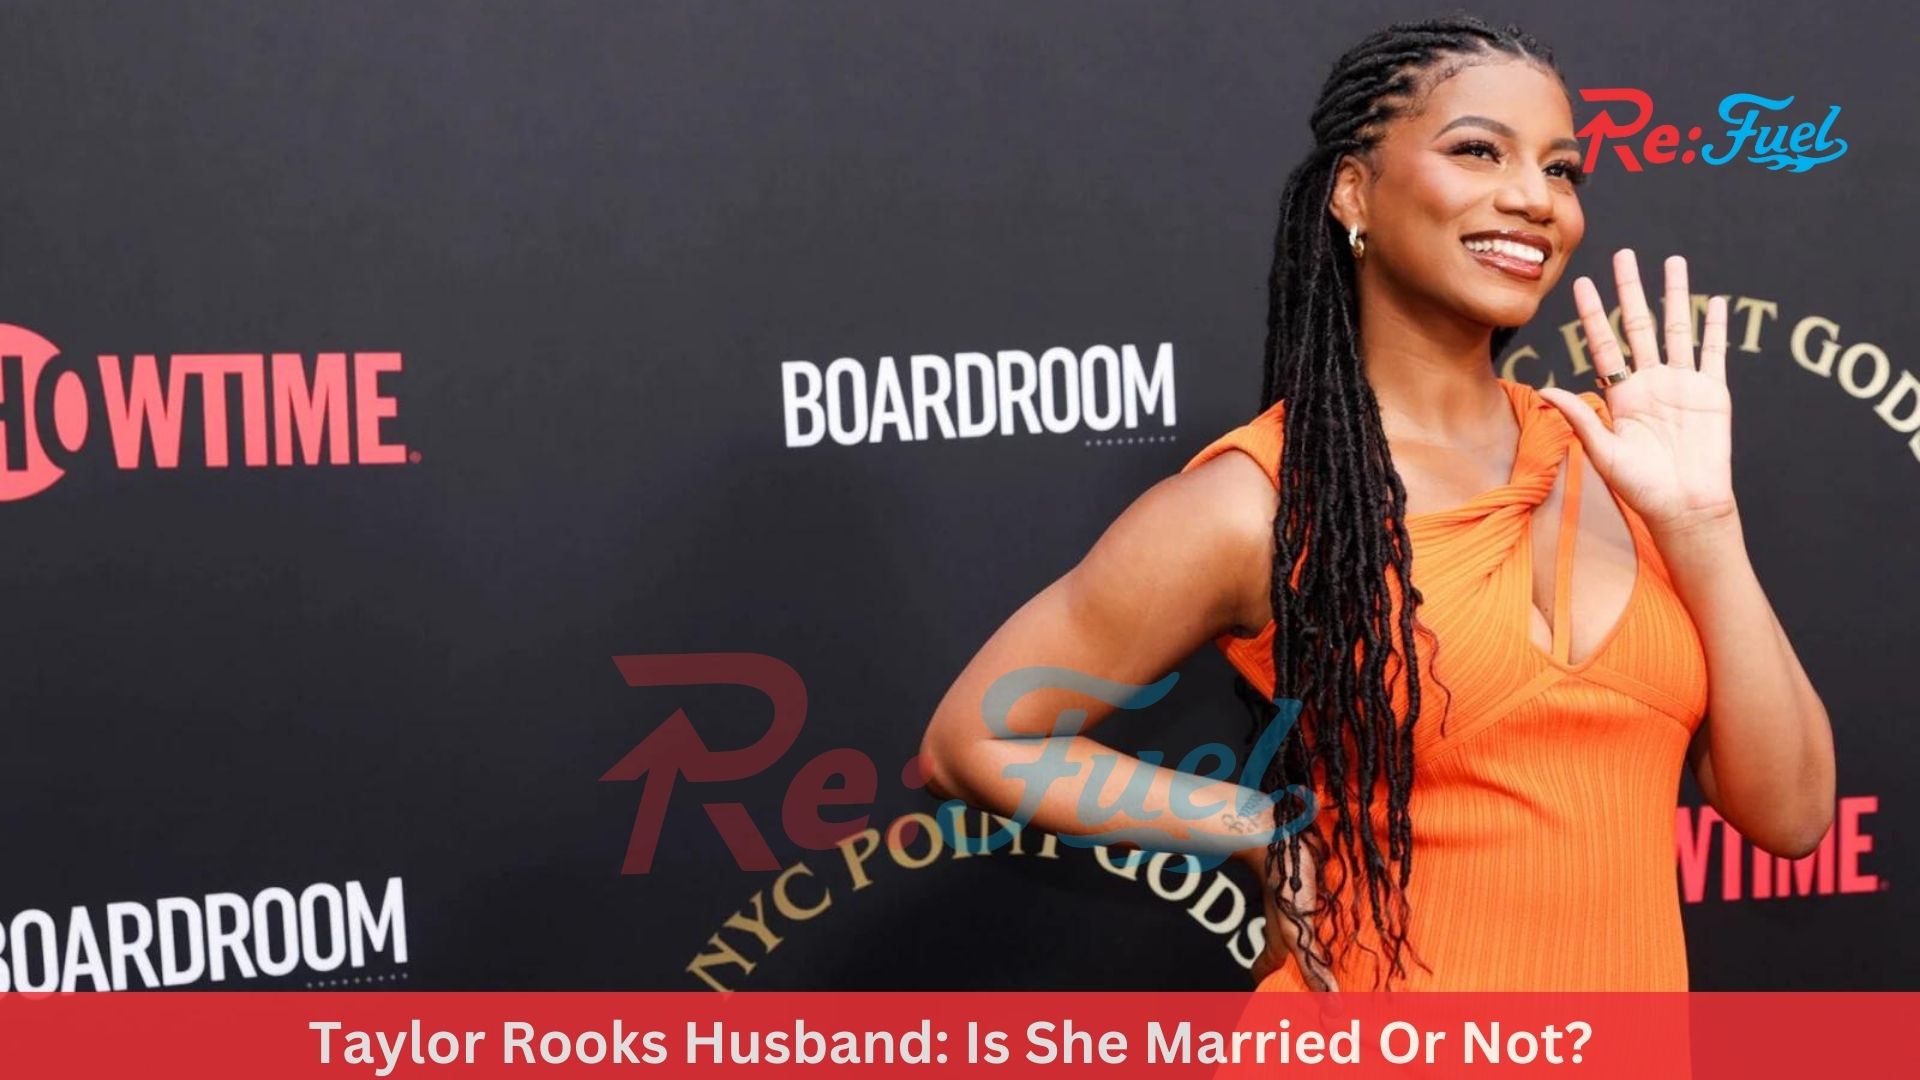 Taylor Rooks Husband: Is She Married Or Not?